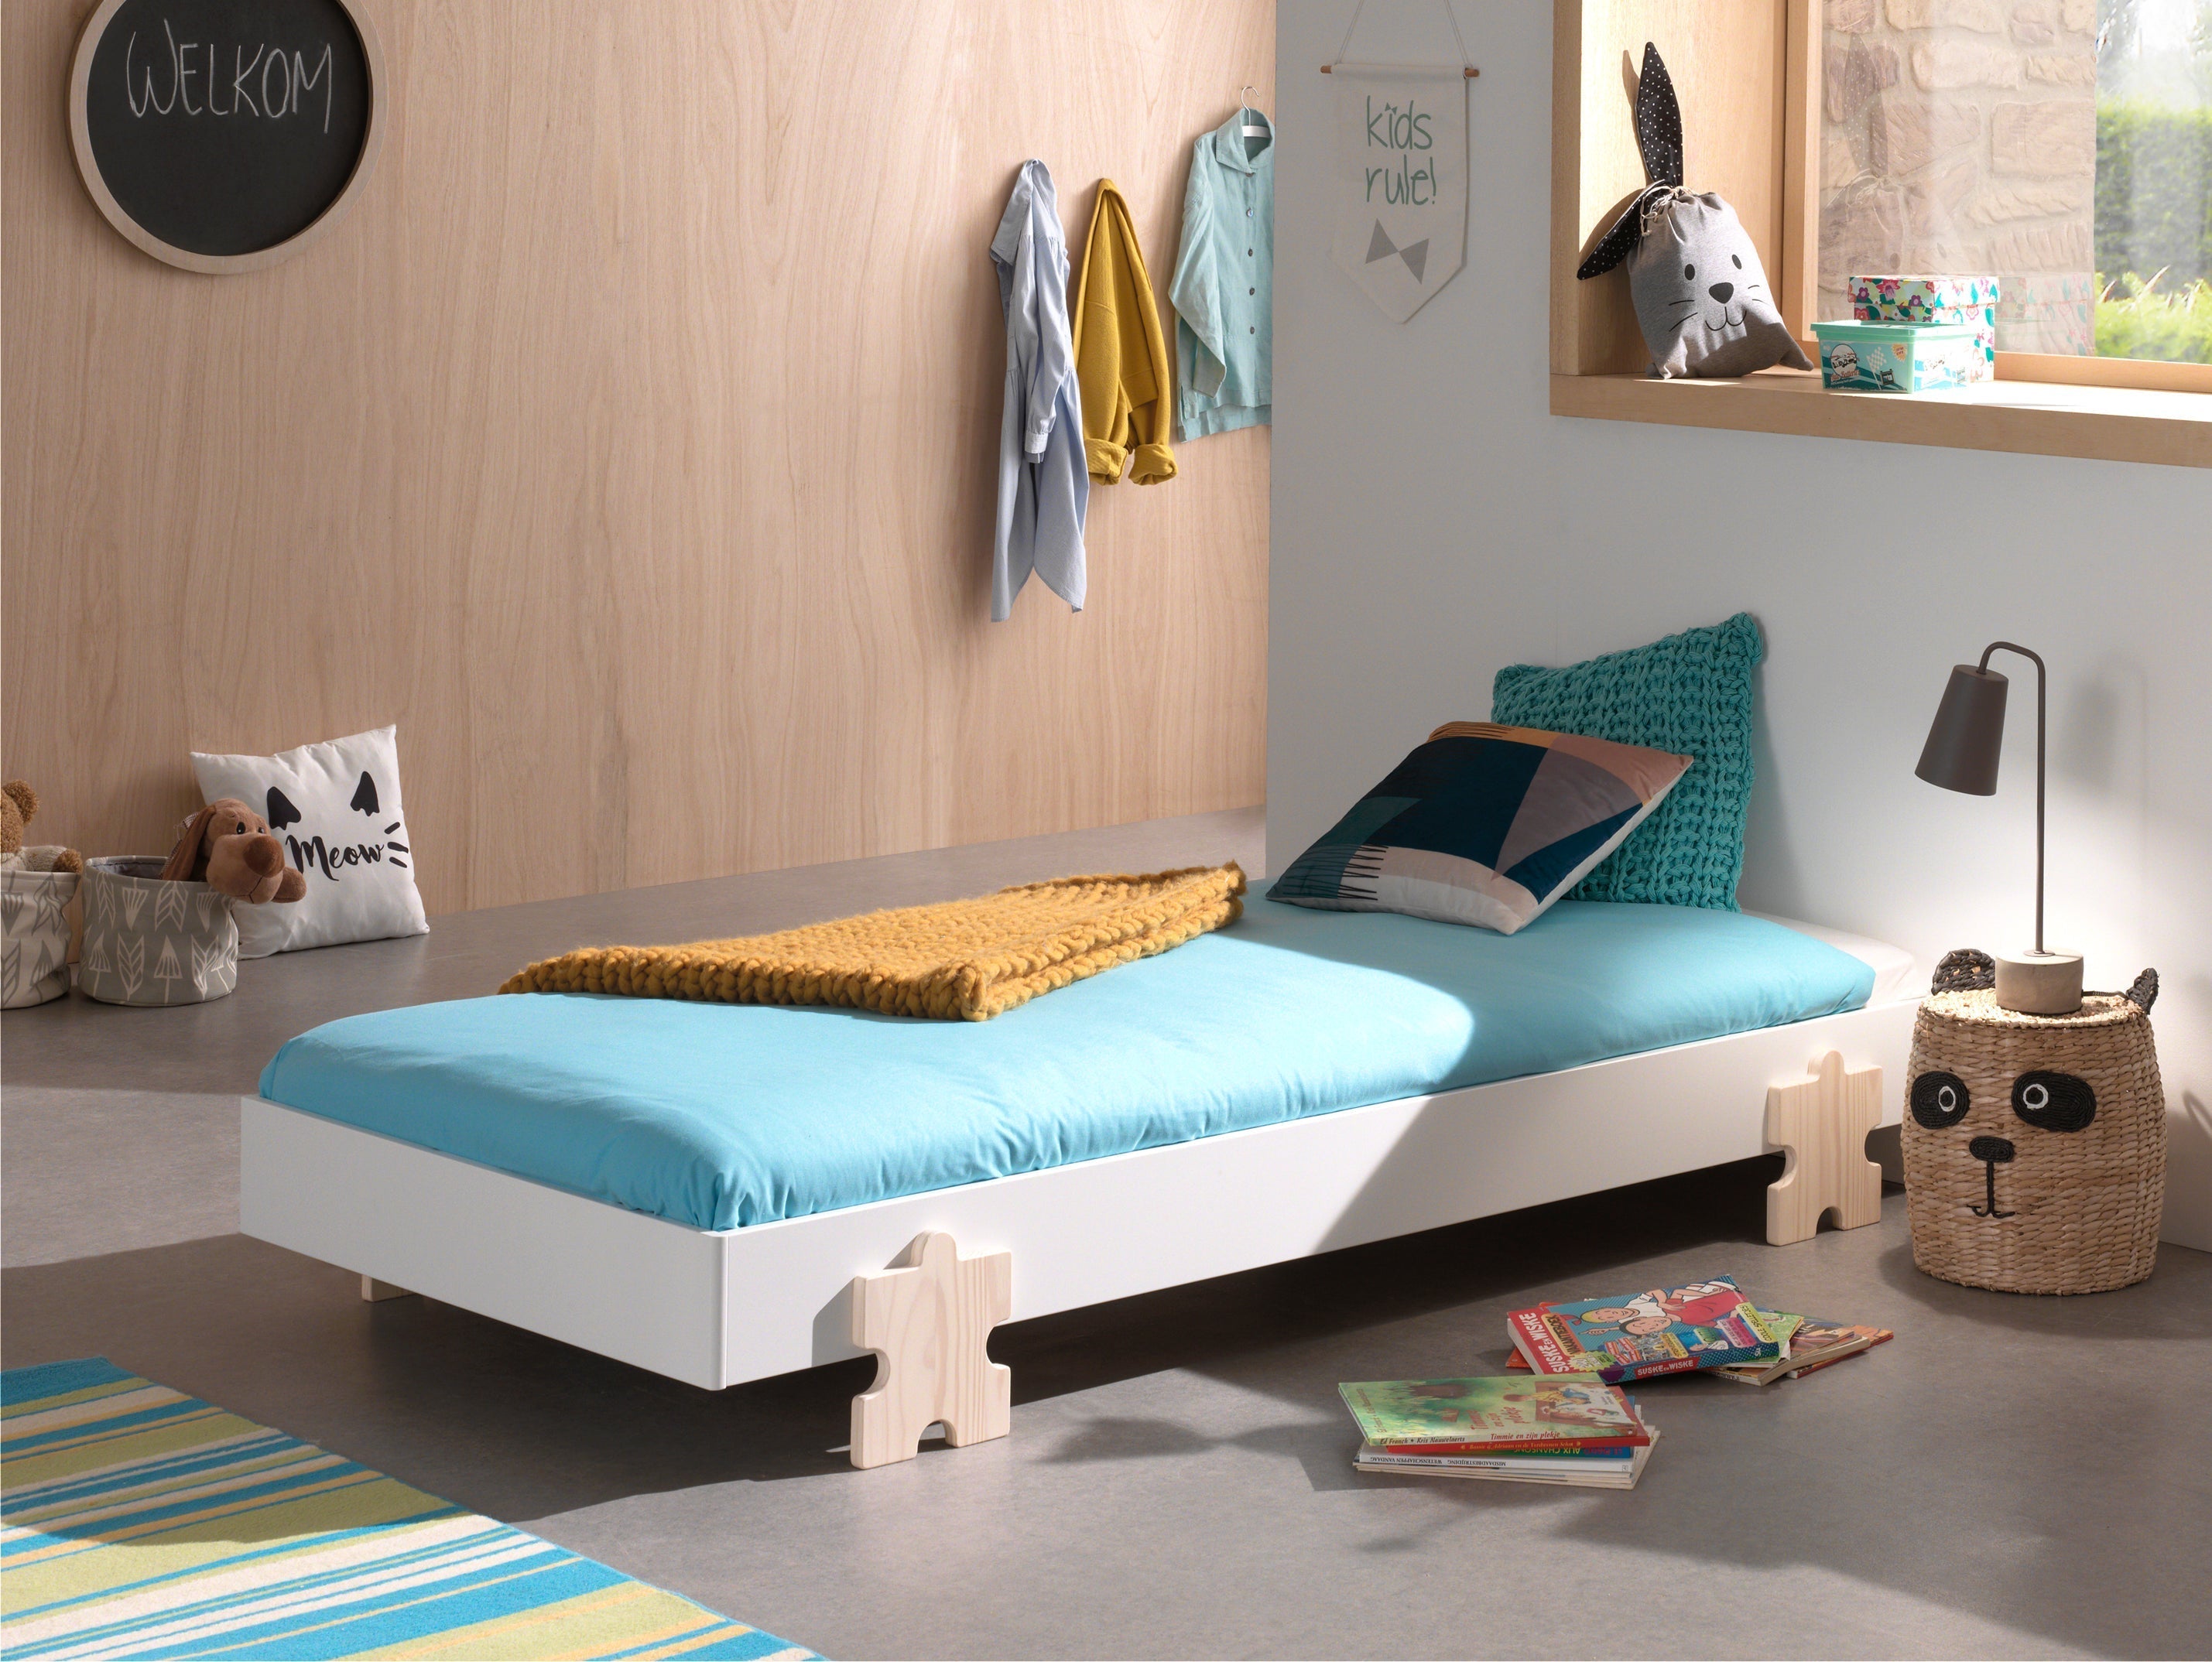 Vipack Modulo Puzzle Kids Single Stacker Bed - White